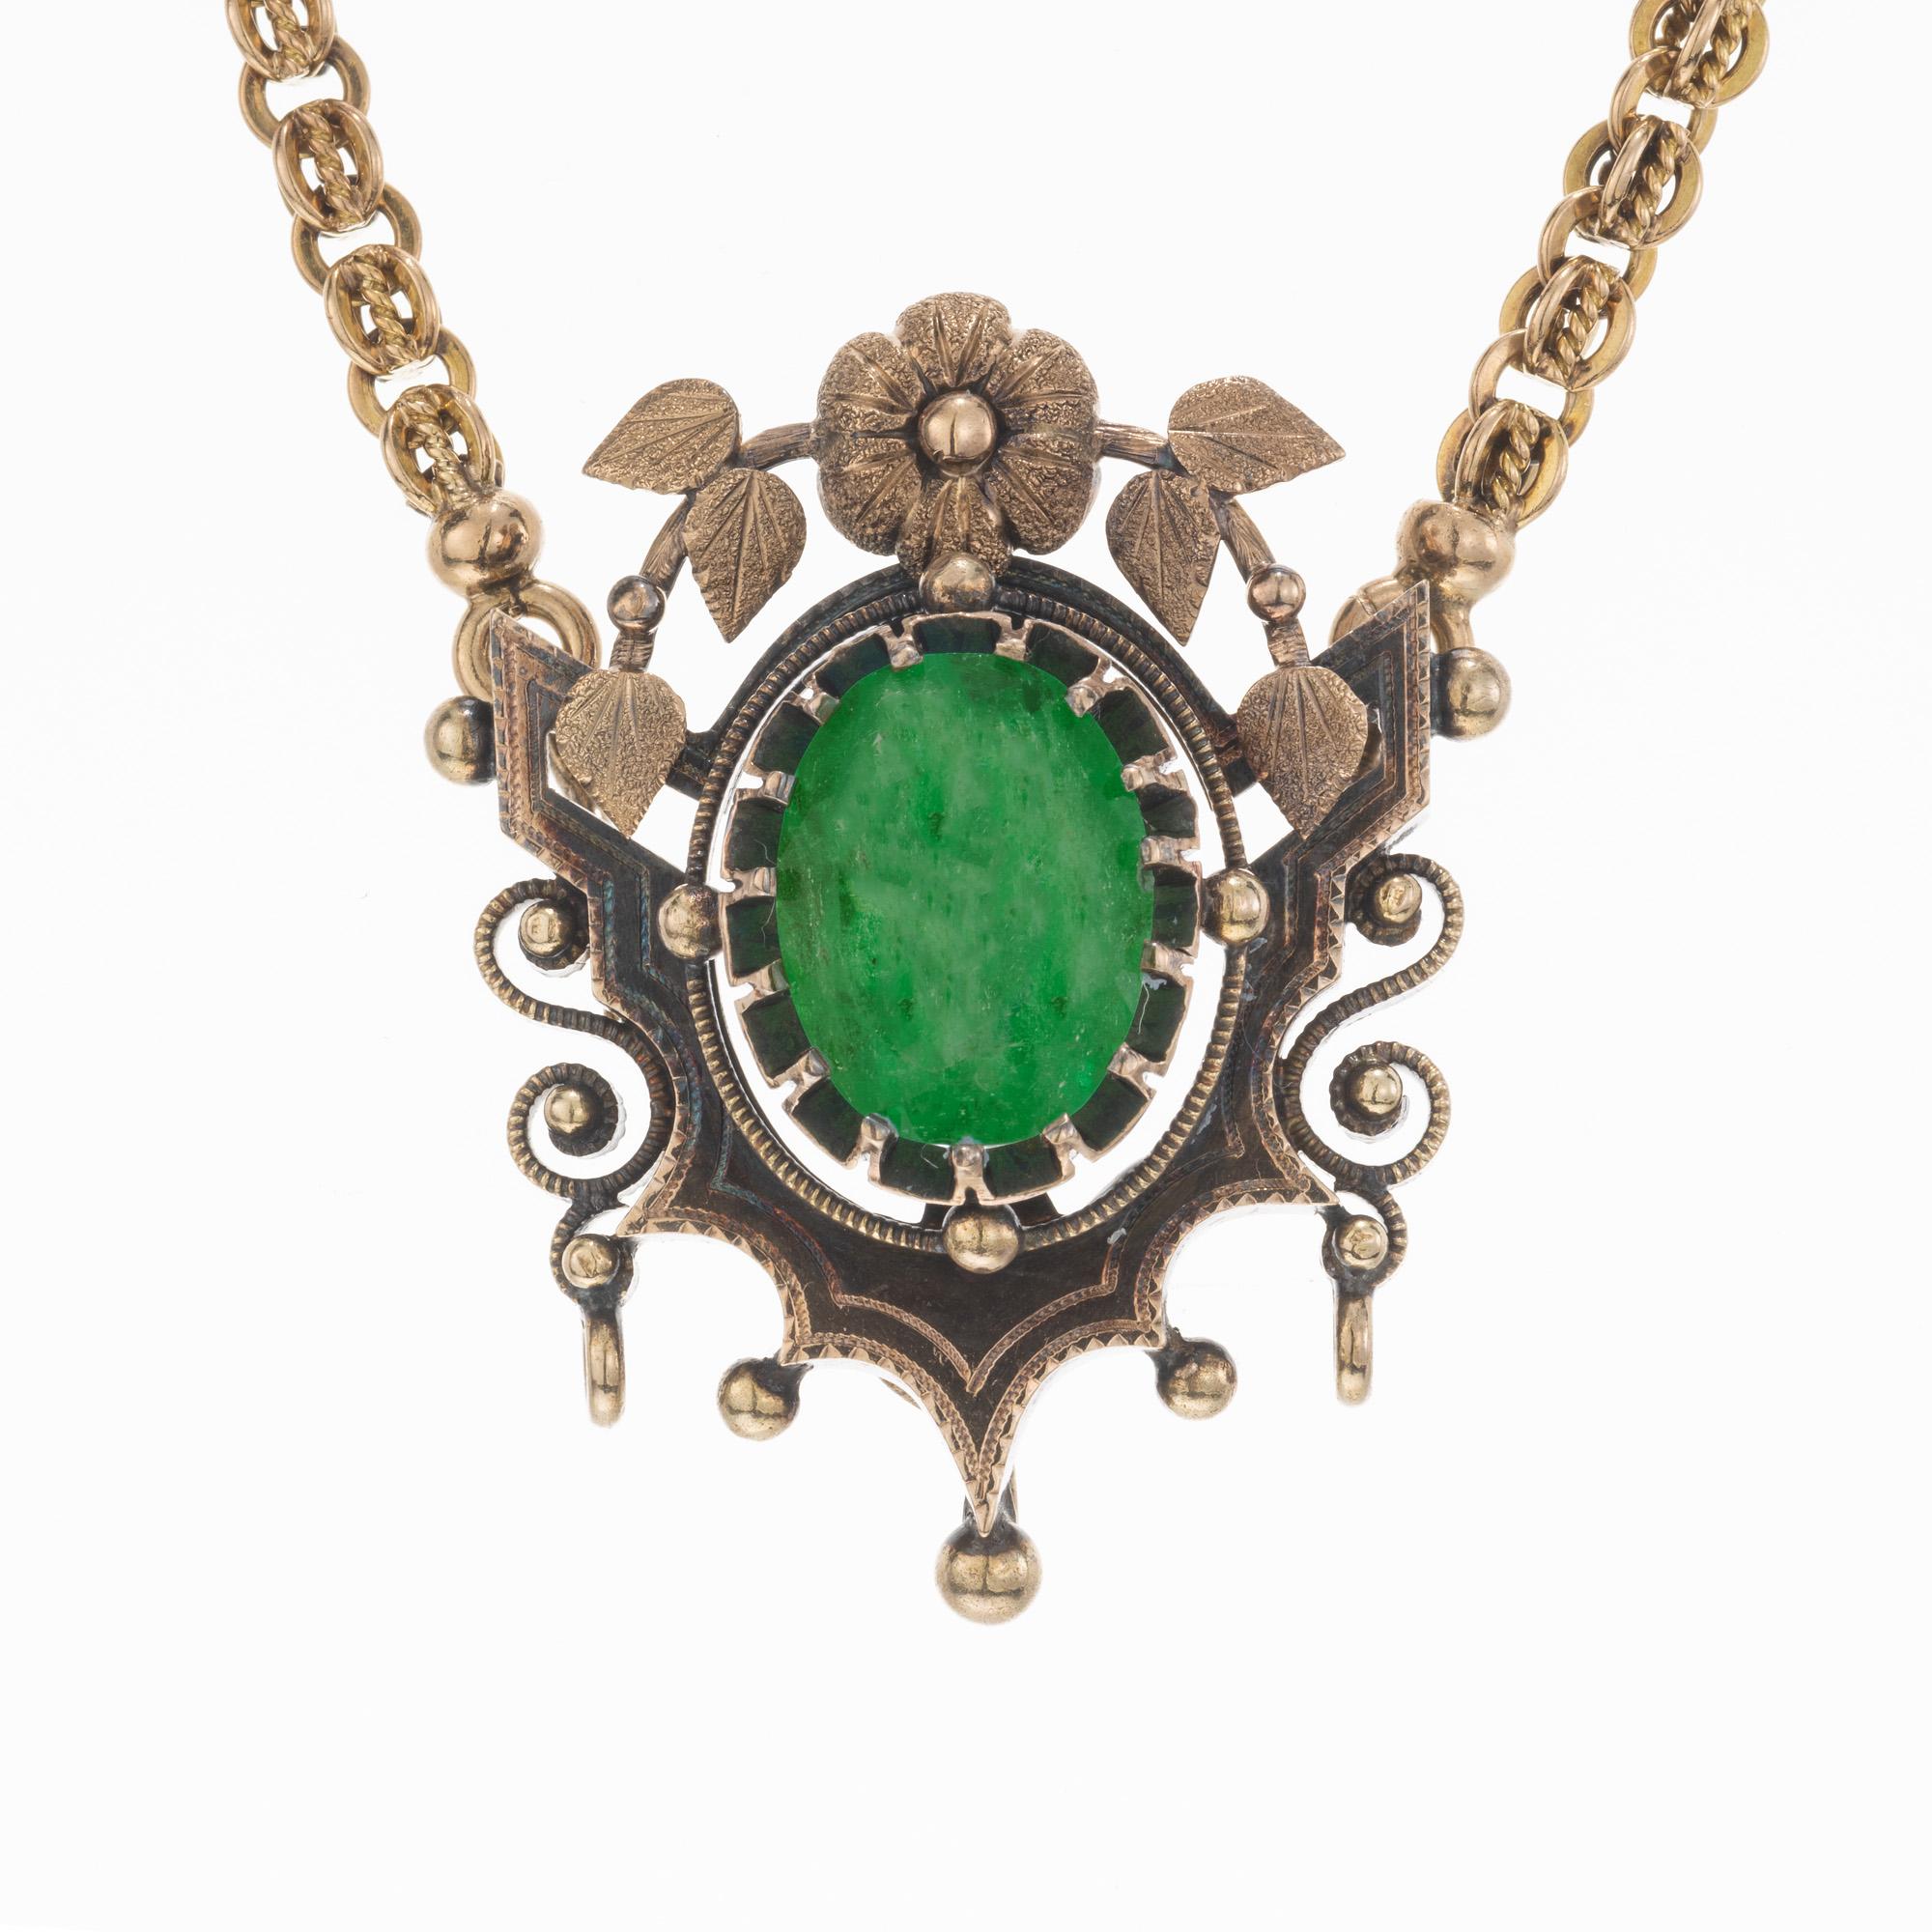 Handmade Victorian antique emerald pendant necklace circa 1860s. 4.50ct oval emerald center stone, set in a natural patina pendant setting. The 19.25 inch chain also has natural patina. There are hidden loops for a drop beneath the Emerald. The